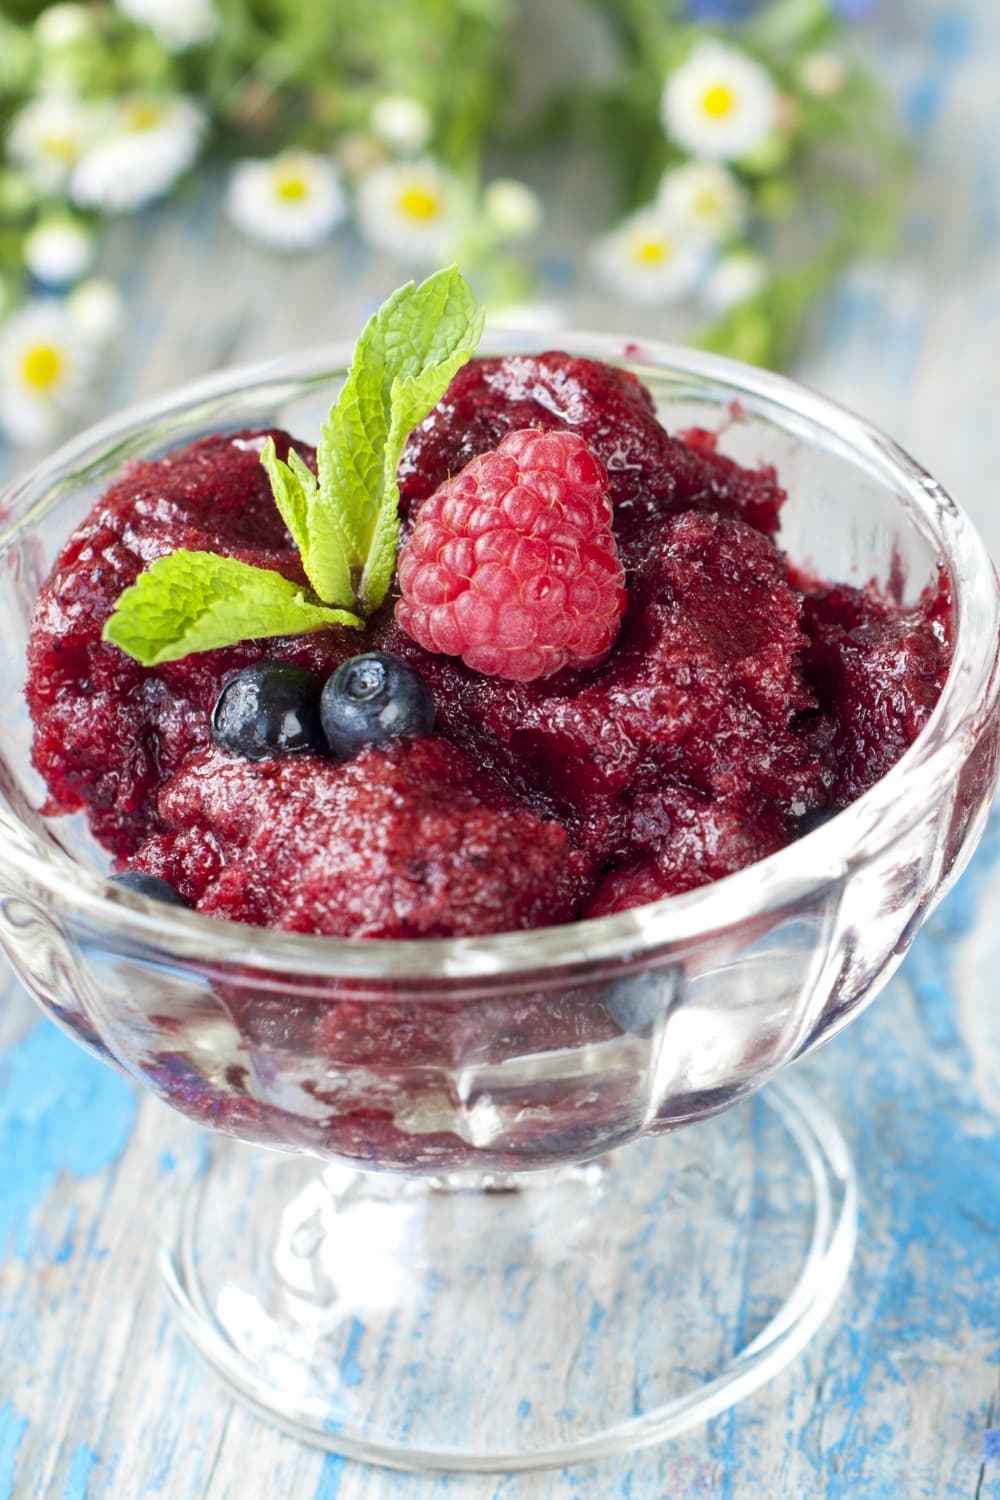 23 Easy Yonanas Recipes To Go Bananas For featuring Homemade Berry Granita with Raspberry, Blueberries and Mint